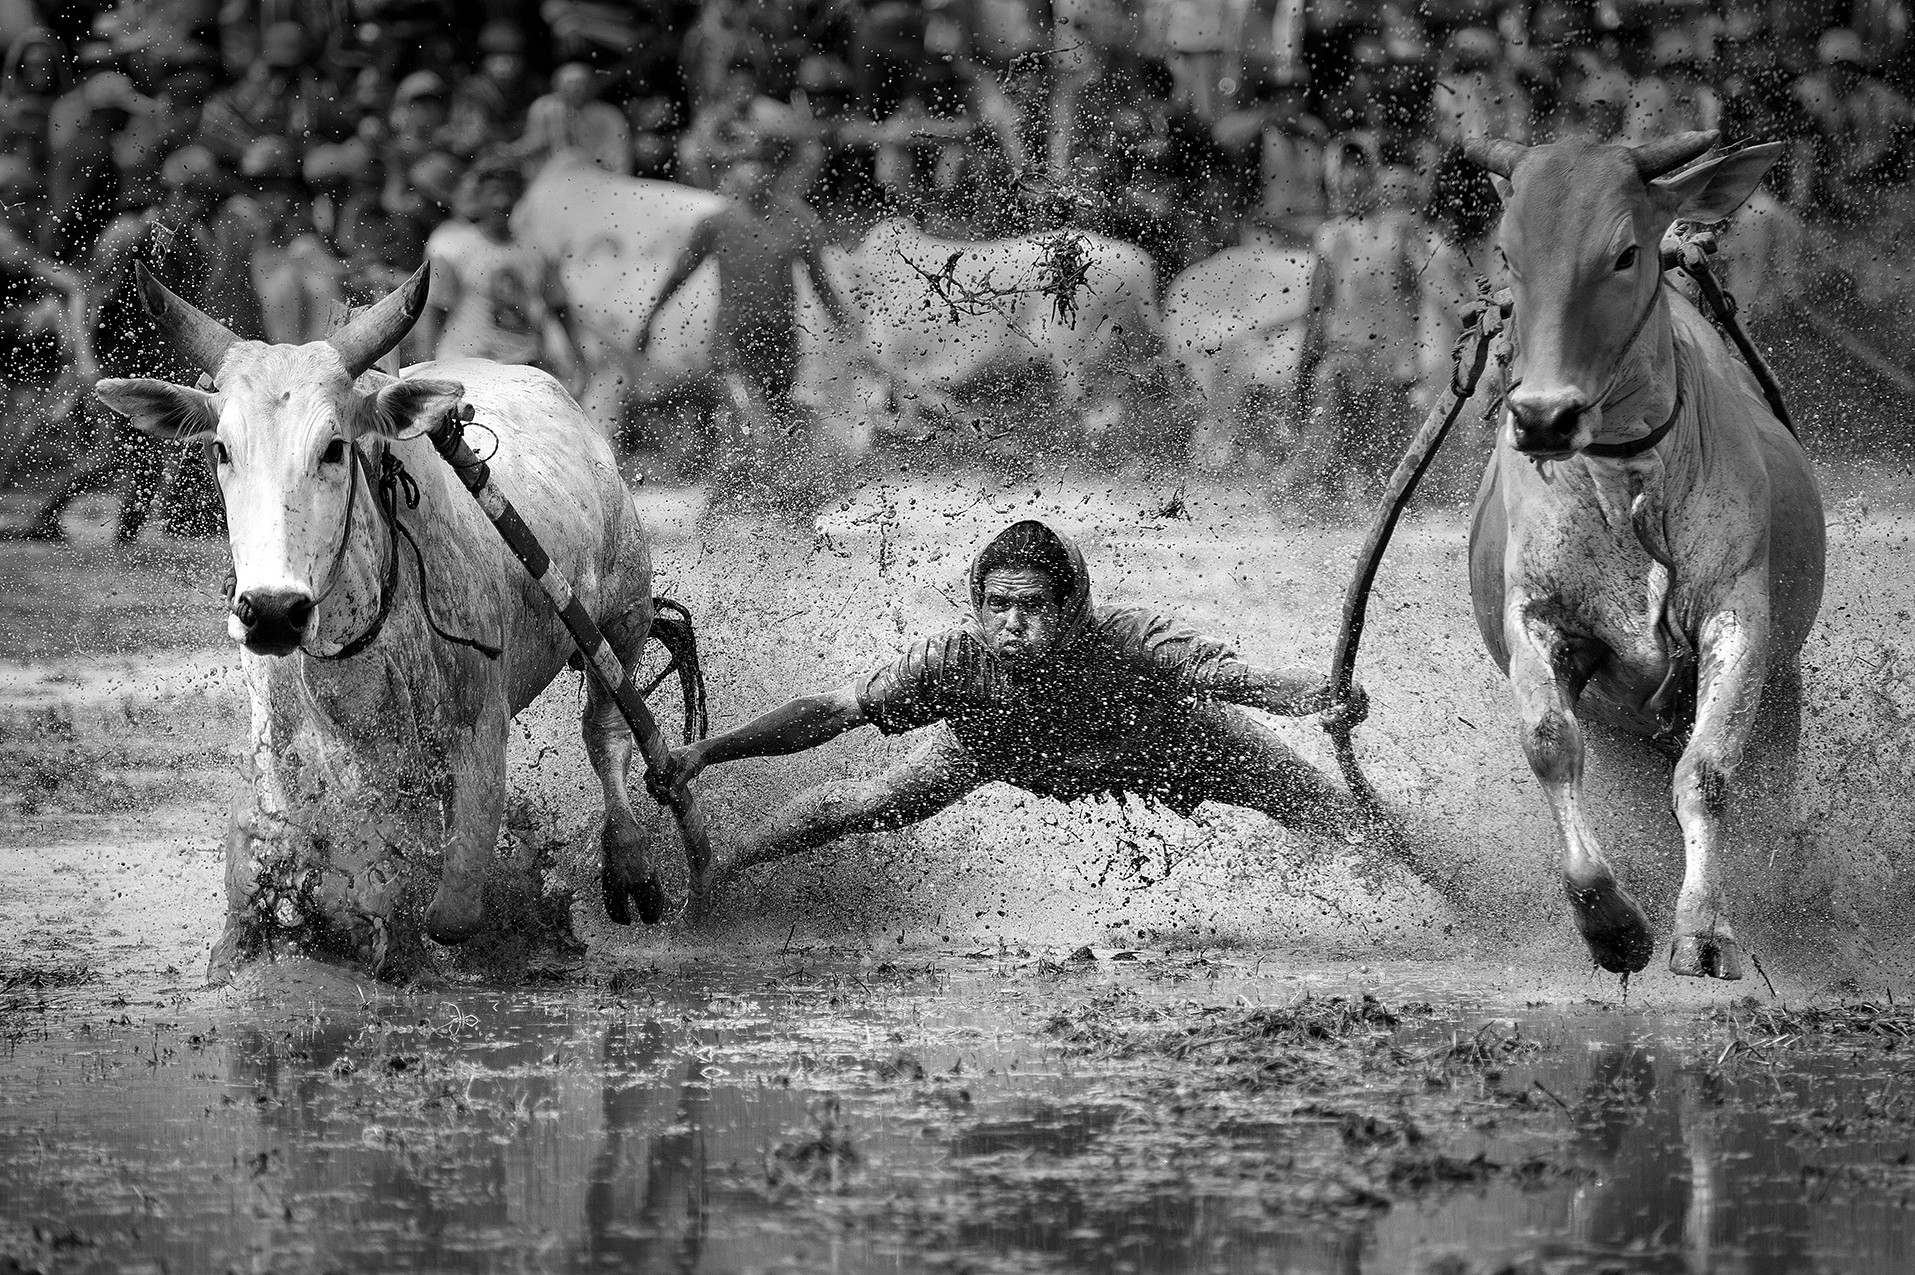 Nominated in the Sport category. The series includes shots of a cow race in Padang, Sumatra, Indonesia